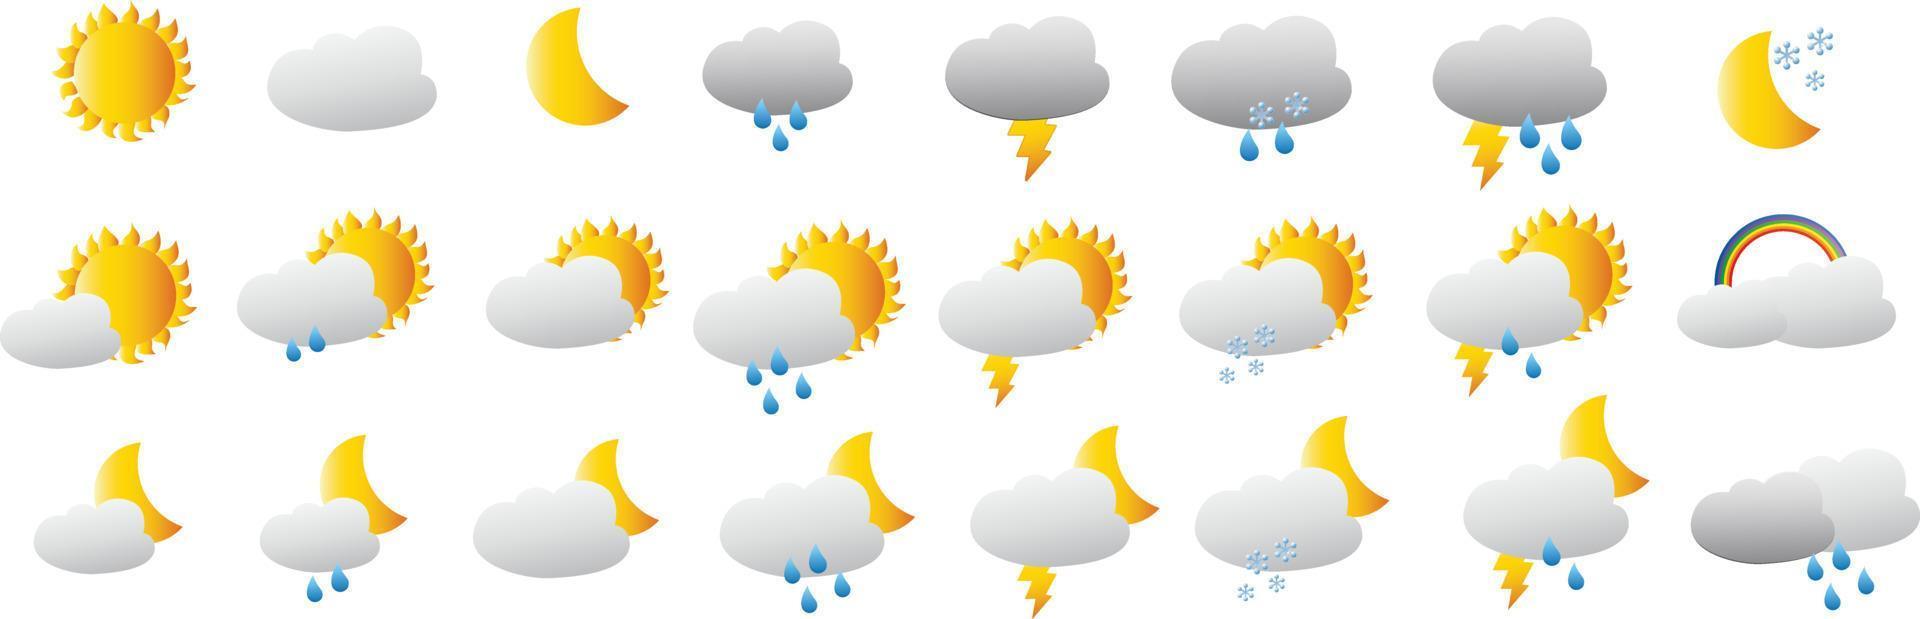 Realistic weather icons collection. Cloud, sun, moon, snow, snowflake, rain, storm, signs set Isolated weathers color symbols.Meteorology vector website illustration